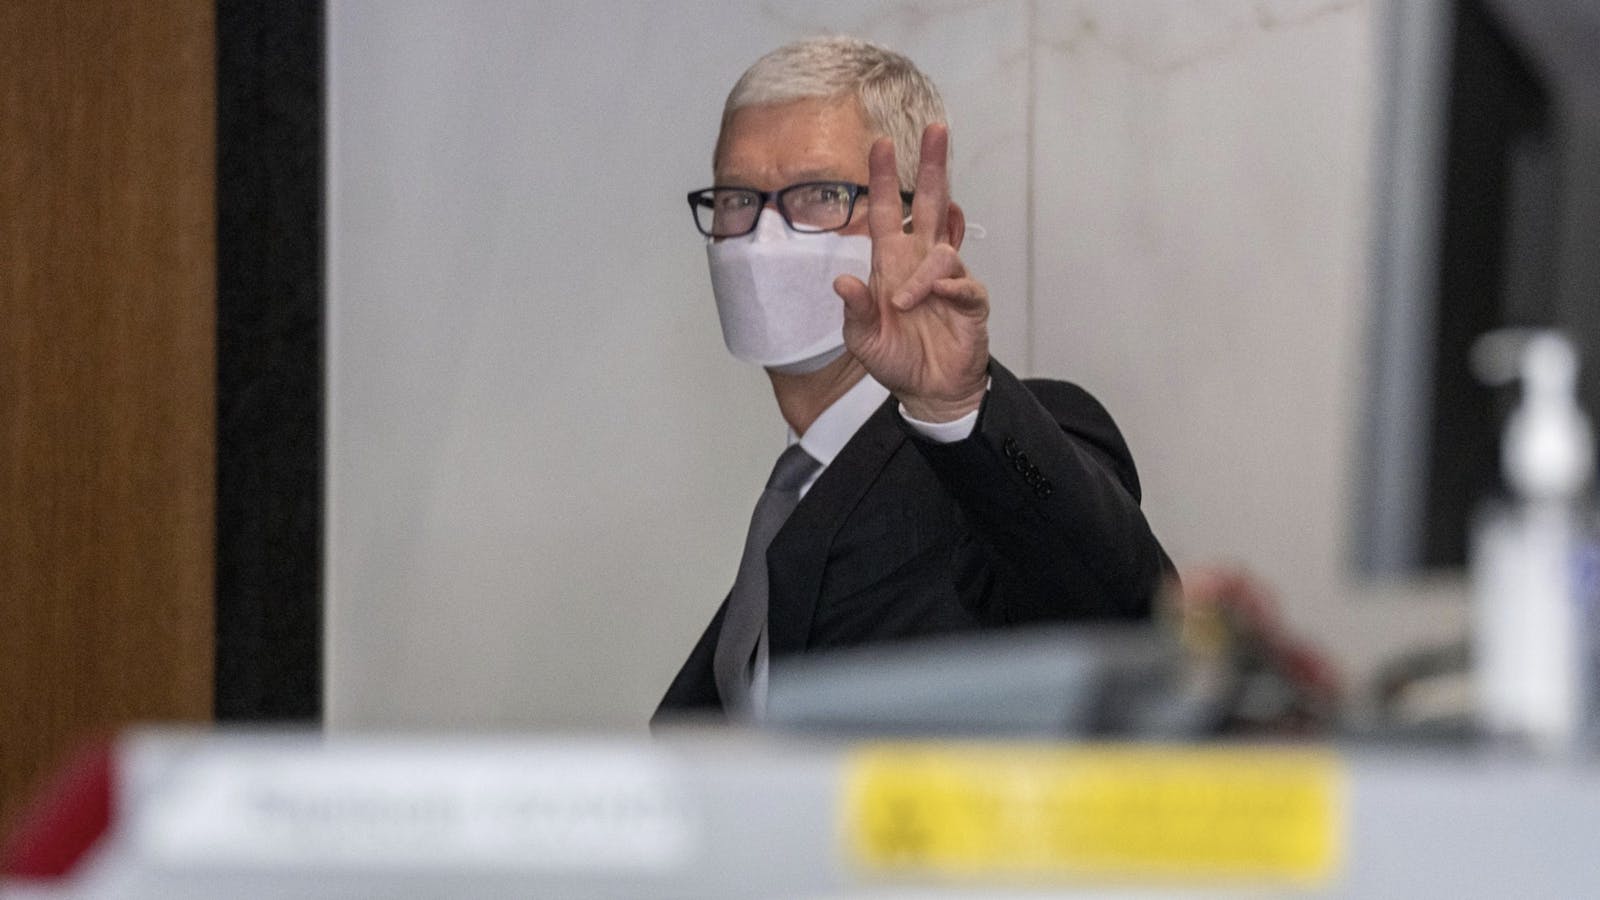 Apple's Tim Cook in the courthouse today. Photo by Bloomberg